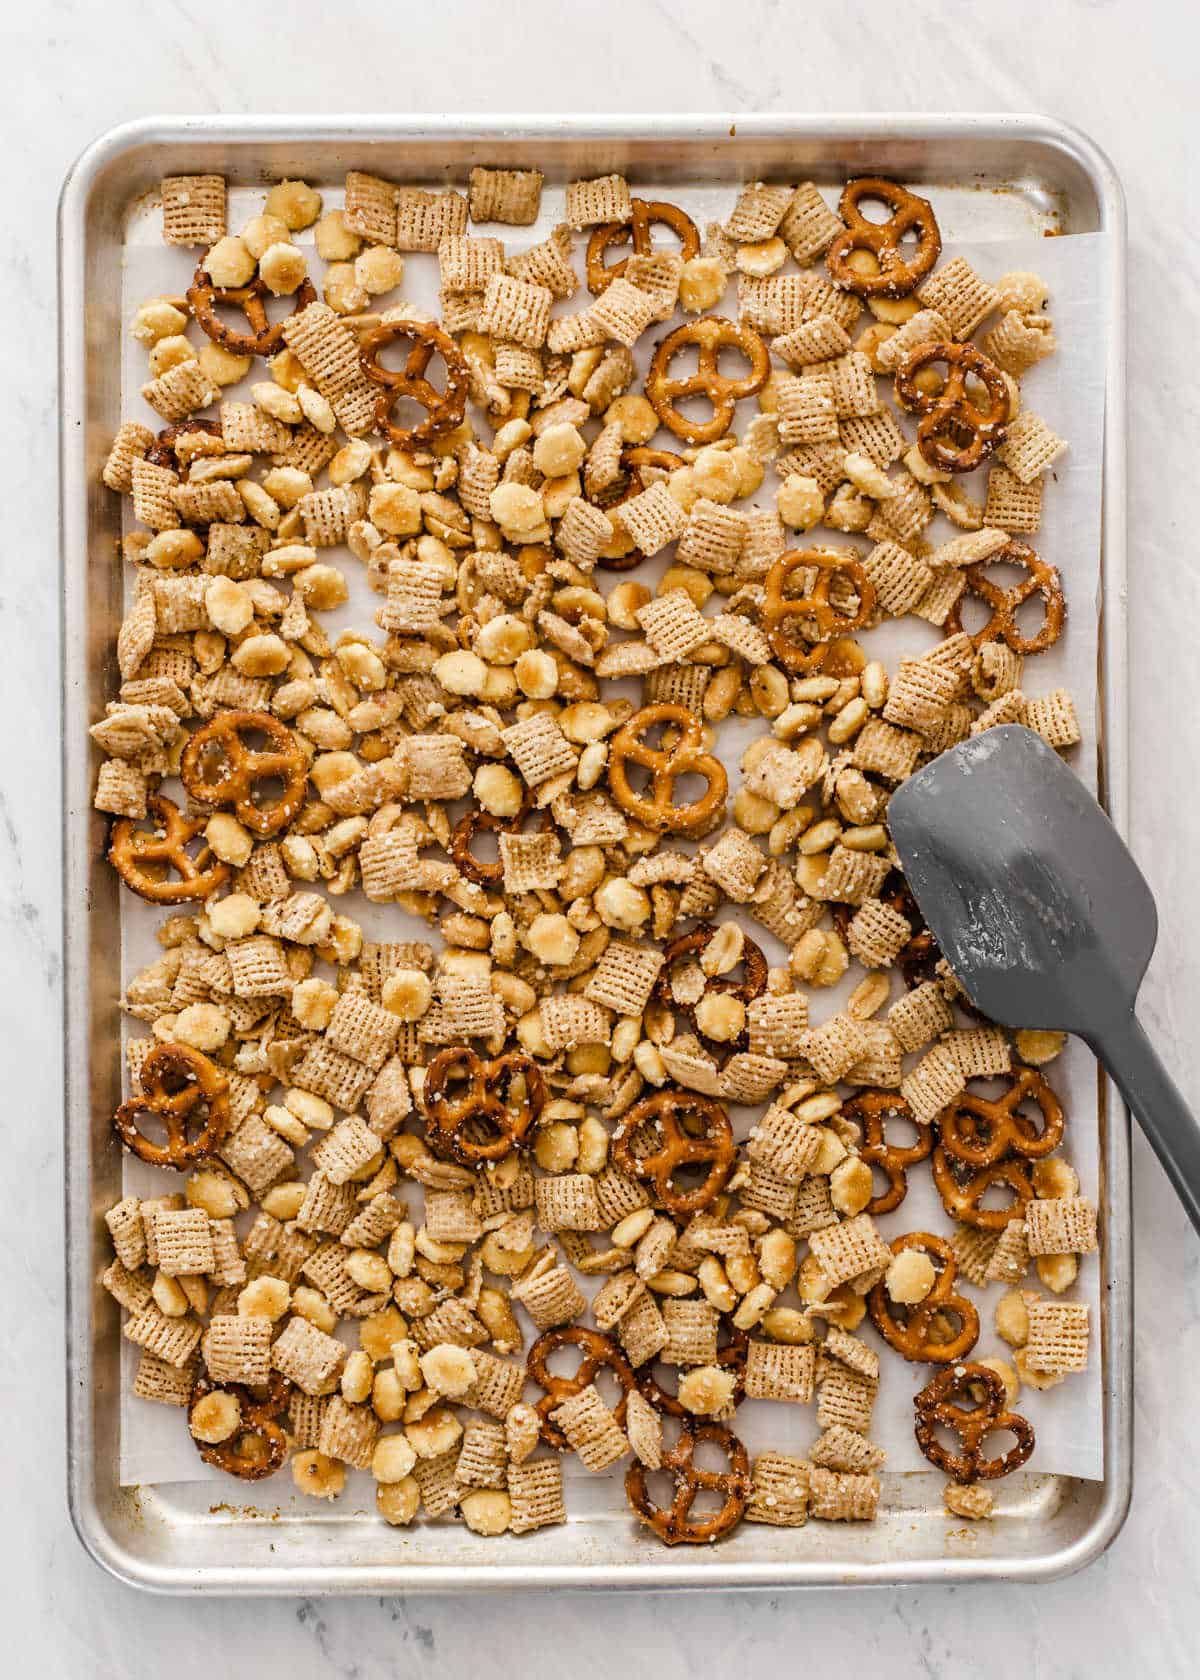 baking sheet with Chex snack mix prepared and ready to bake.